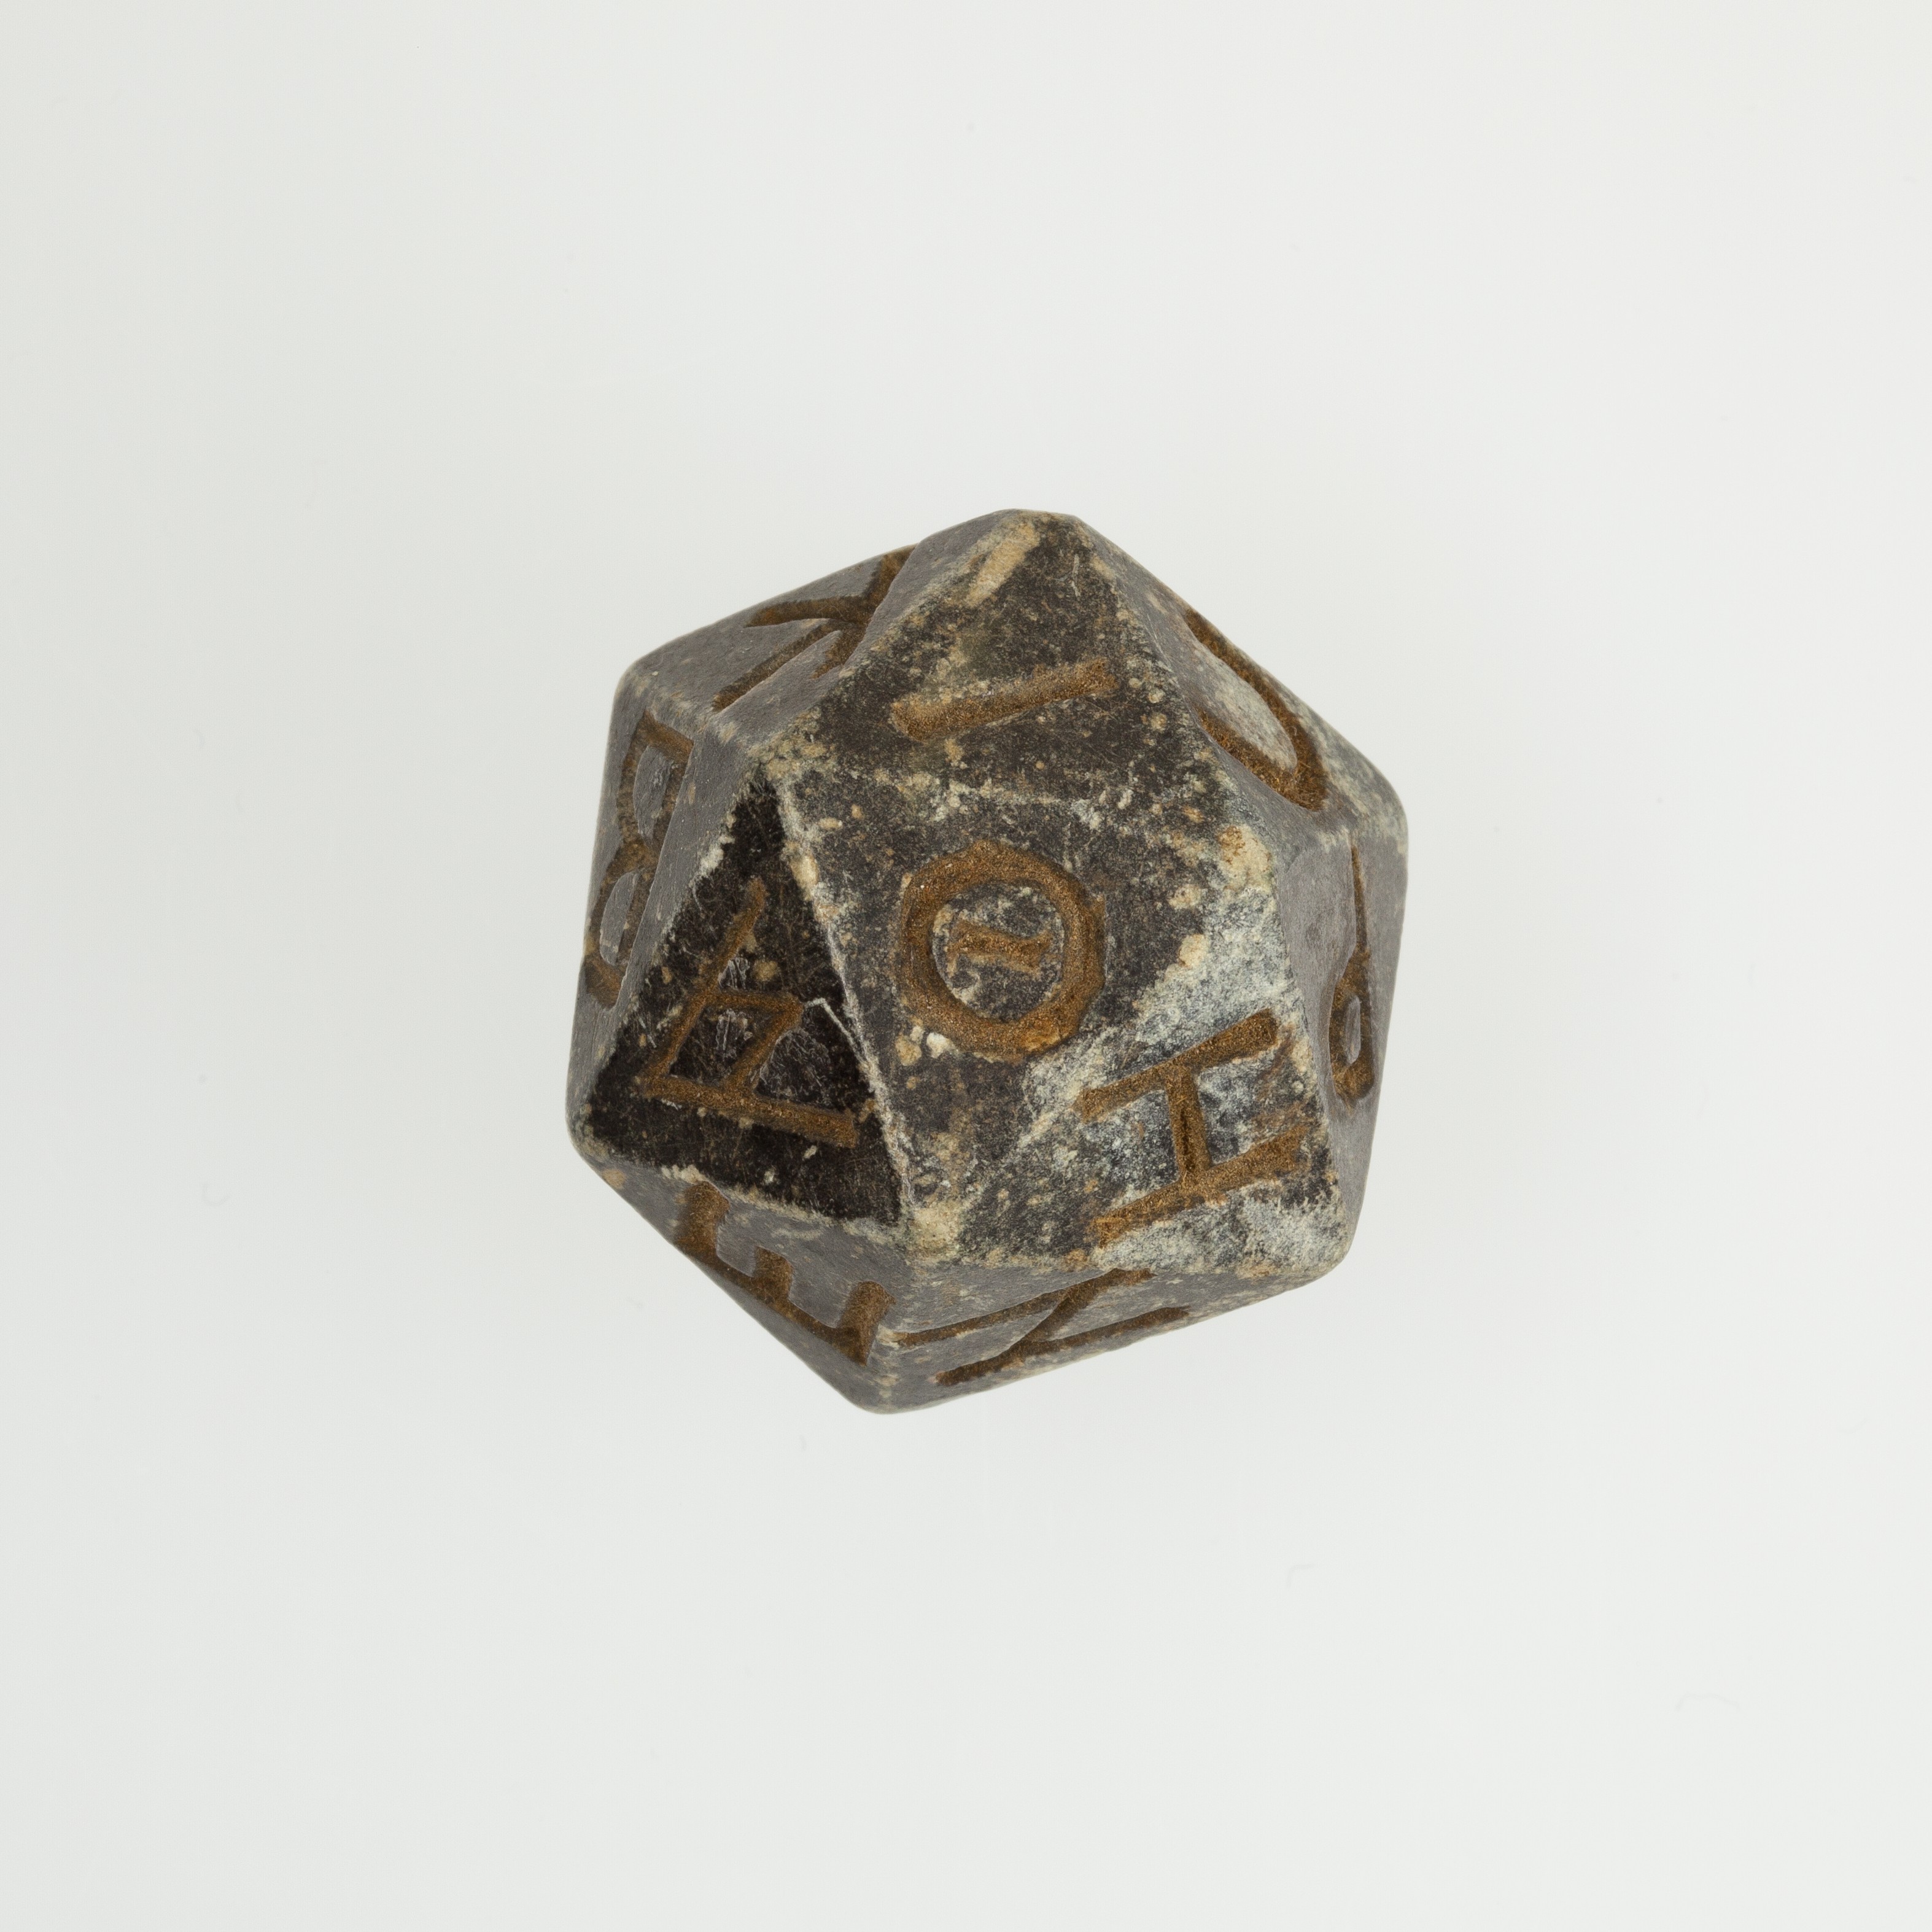 Twenty-sided die (icosahedron) with faces inscribed with Greek letters, Ptolemaic Period–Roman Period